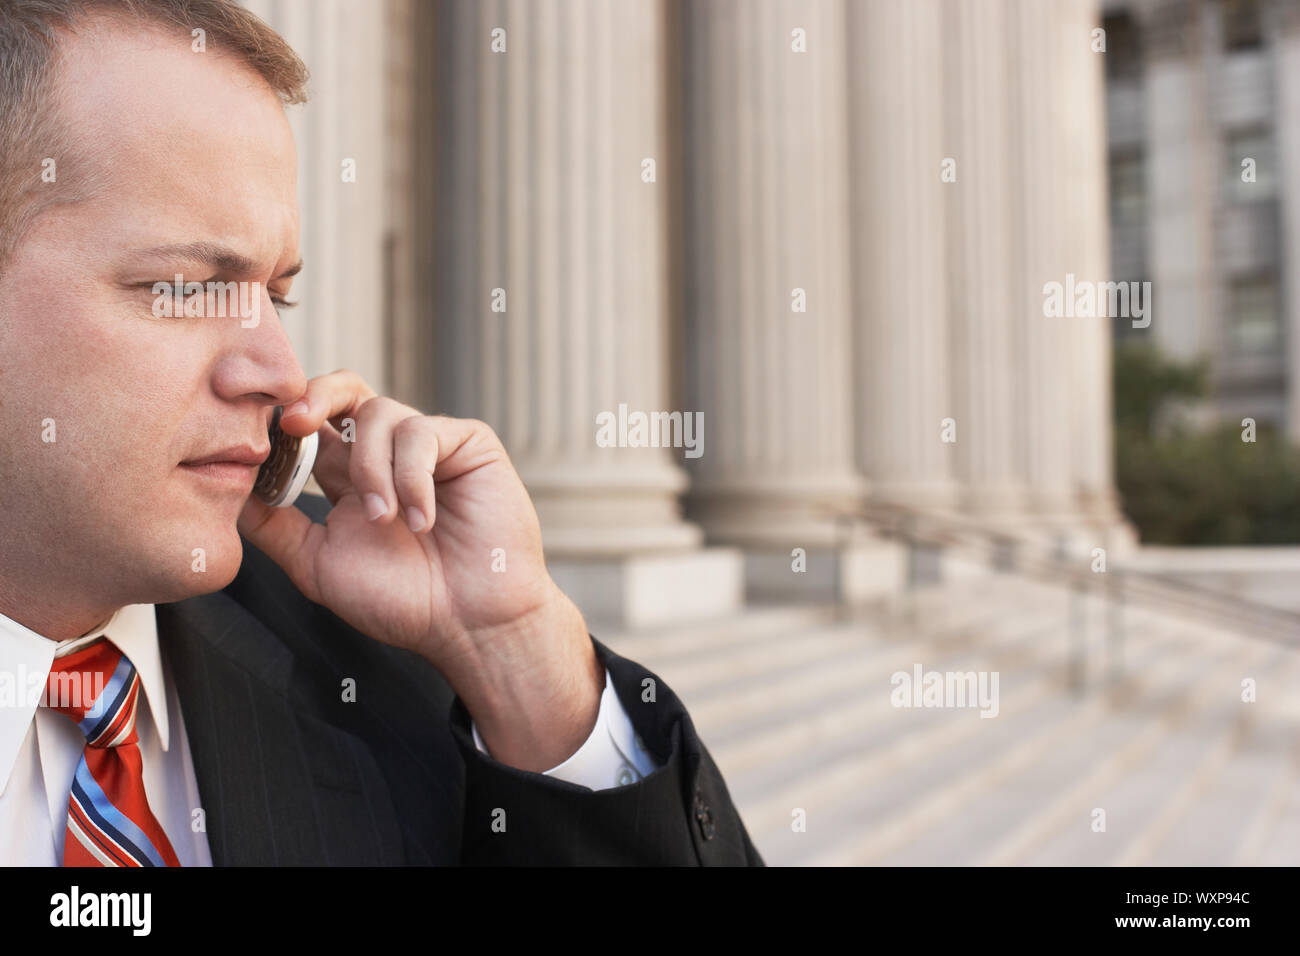 Serious businessman using cell phone in front of building Banque D'Images